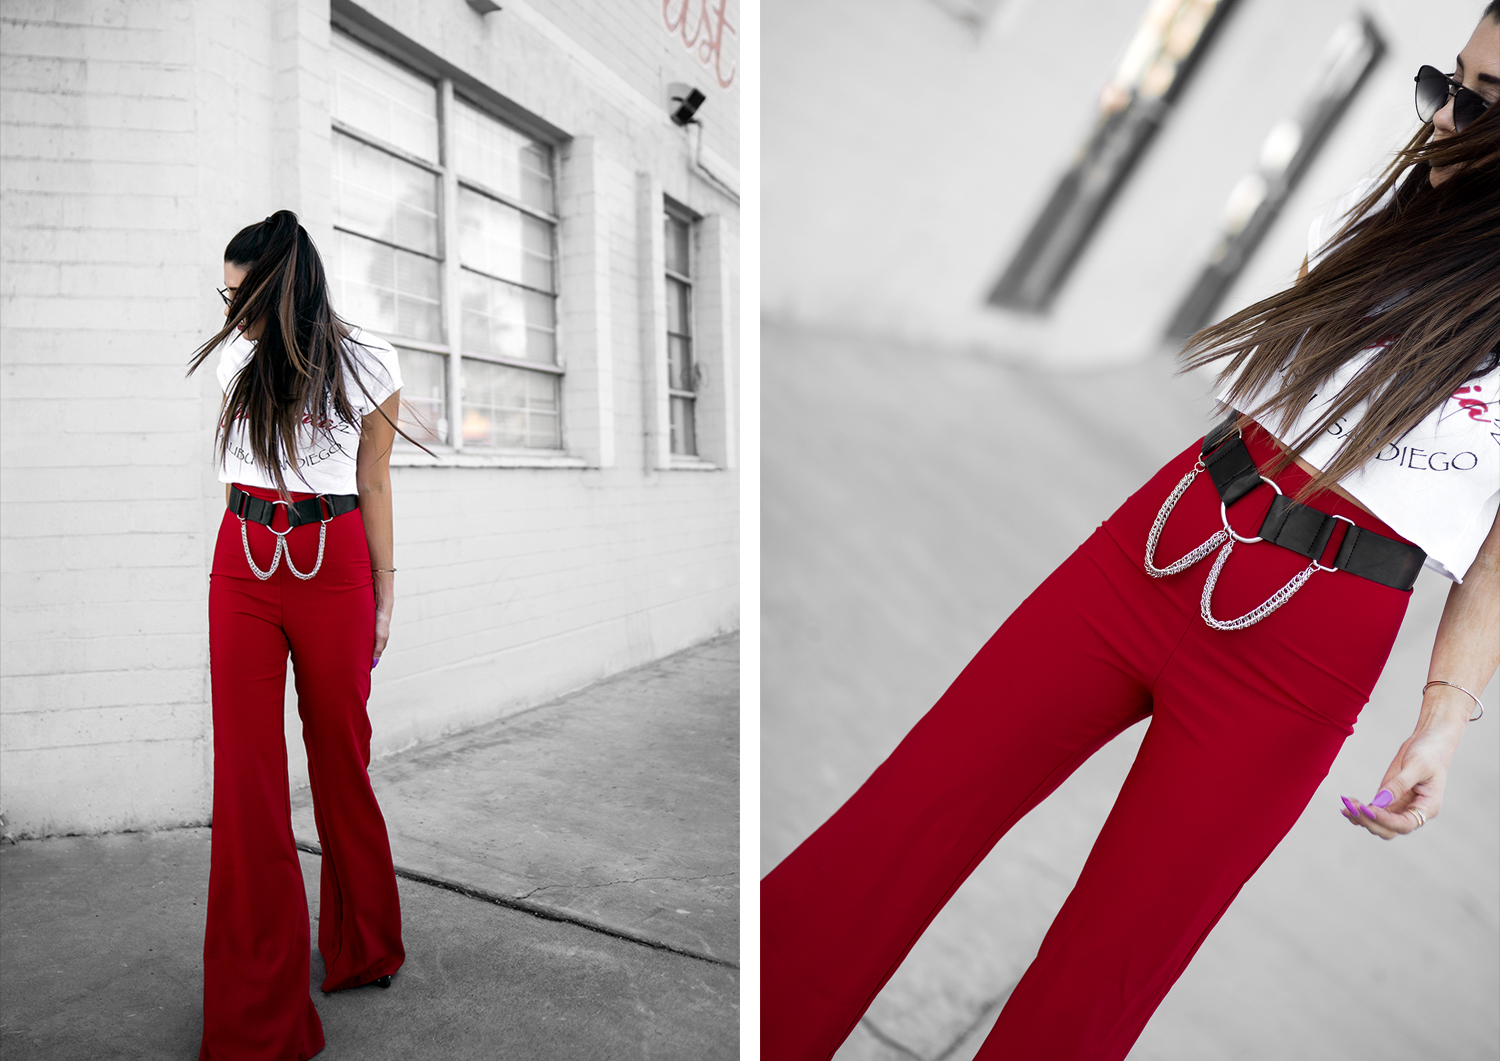 Selfies and narcissism by Erica Stoleman of Fashionlush. Red pants with cool belt.